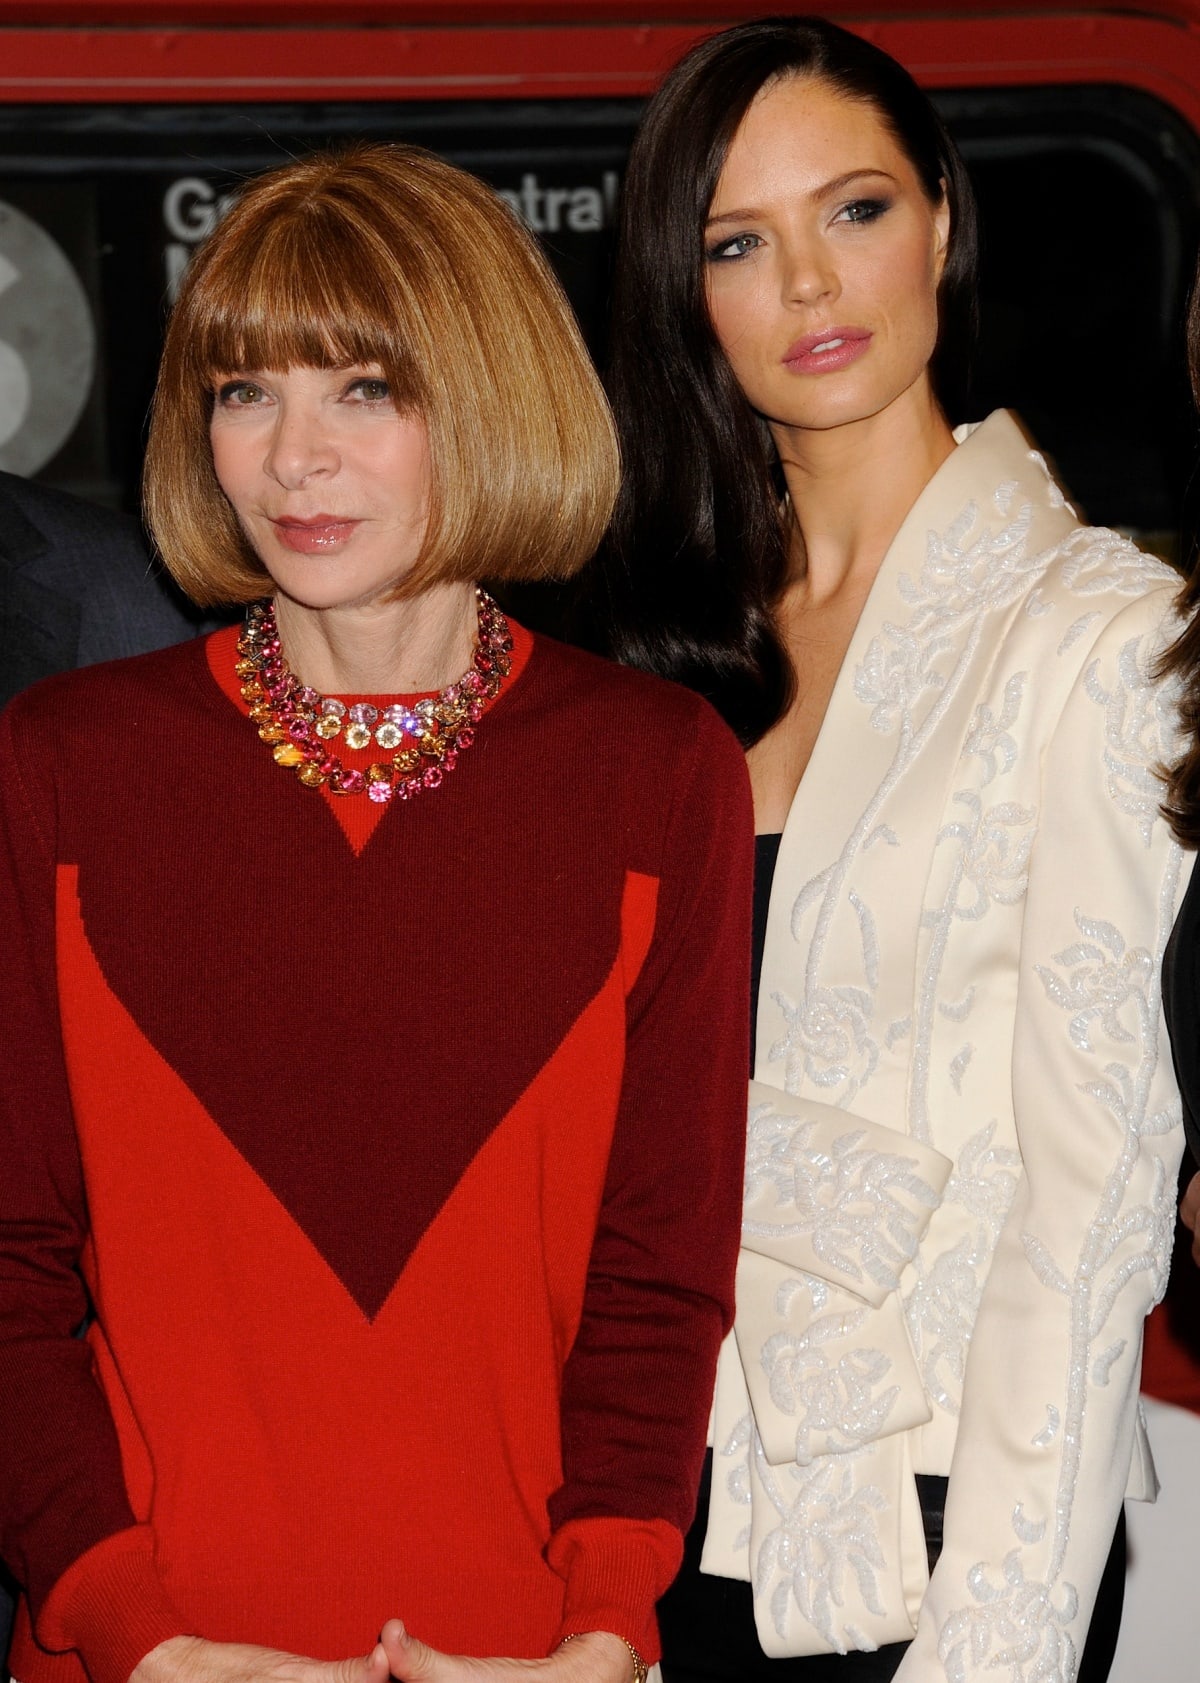 Anna Wintour and Georgina Chapman at Britain’s Great Campaign launch in New York City